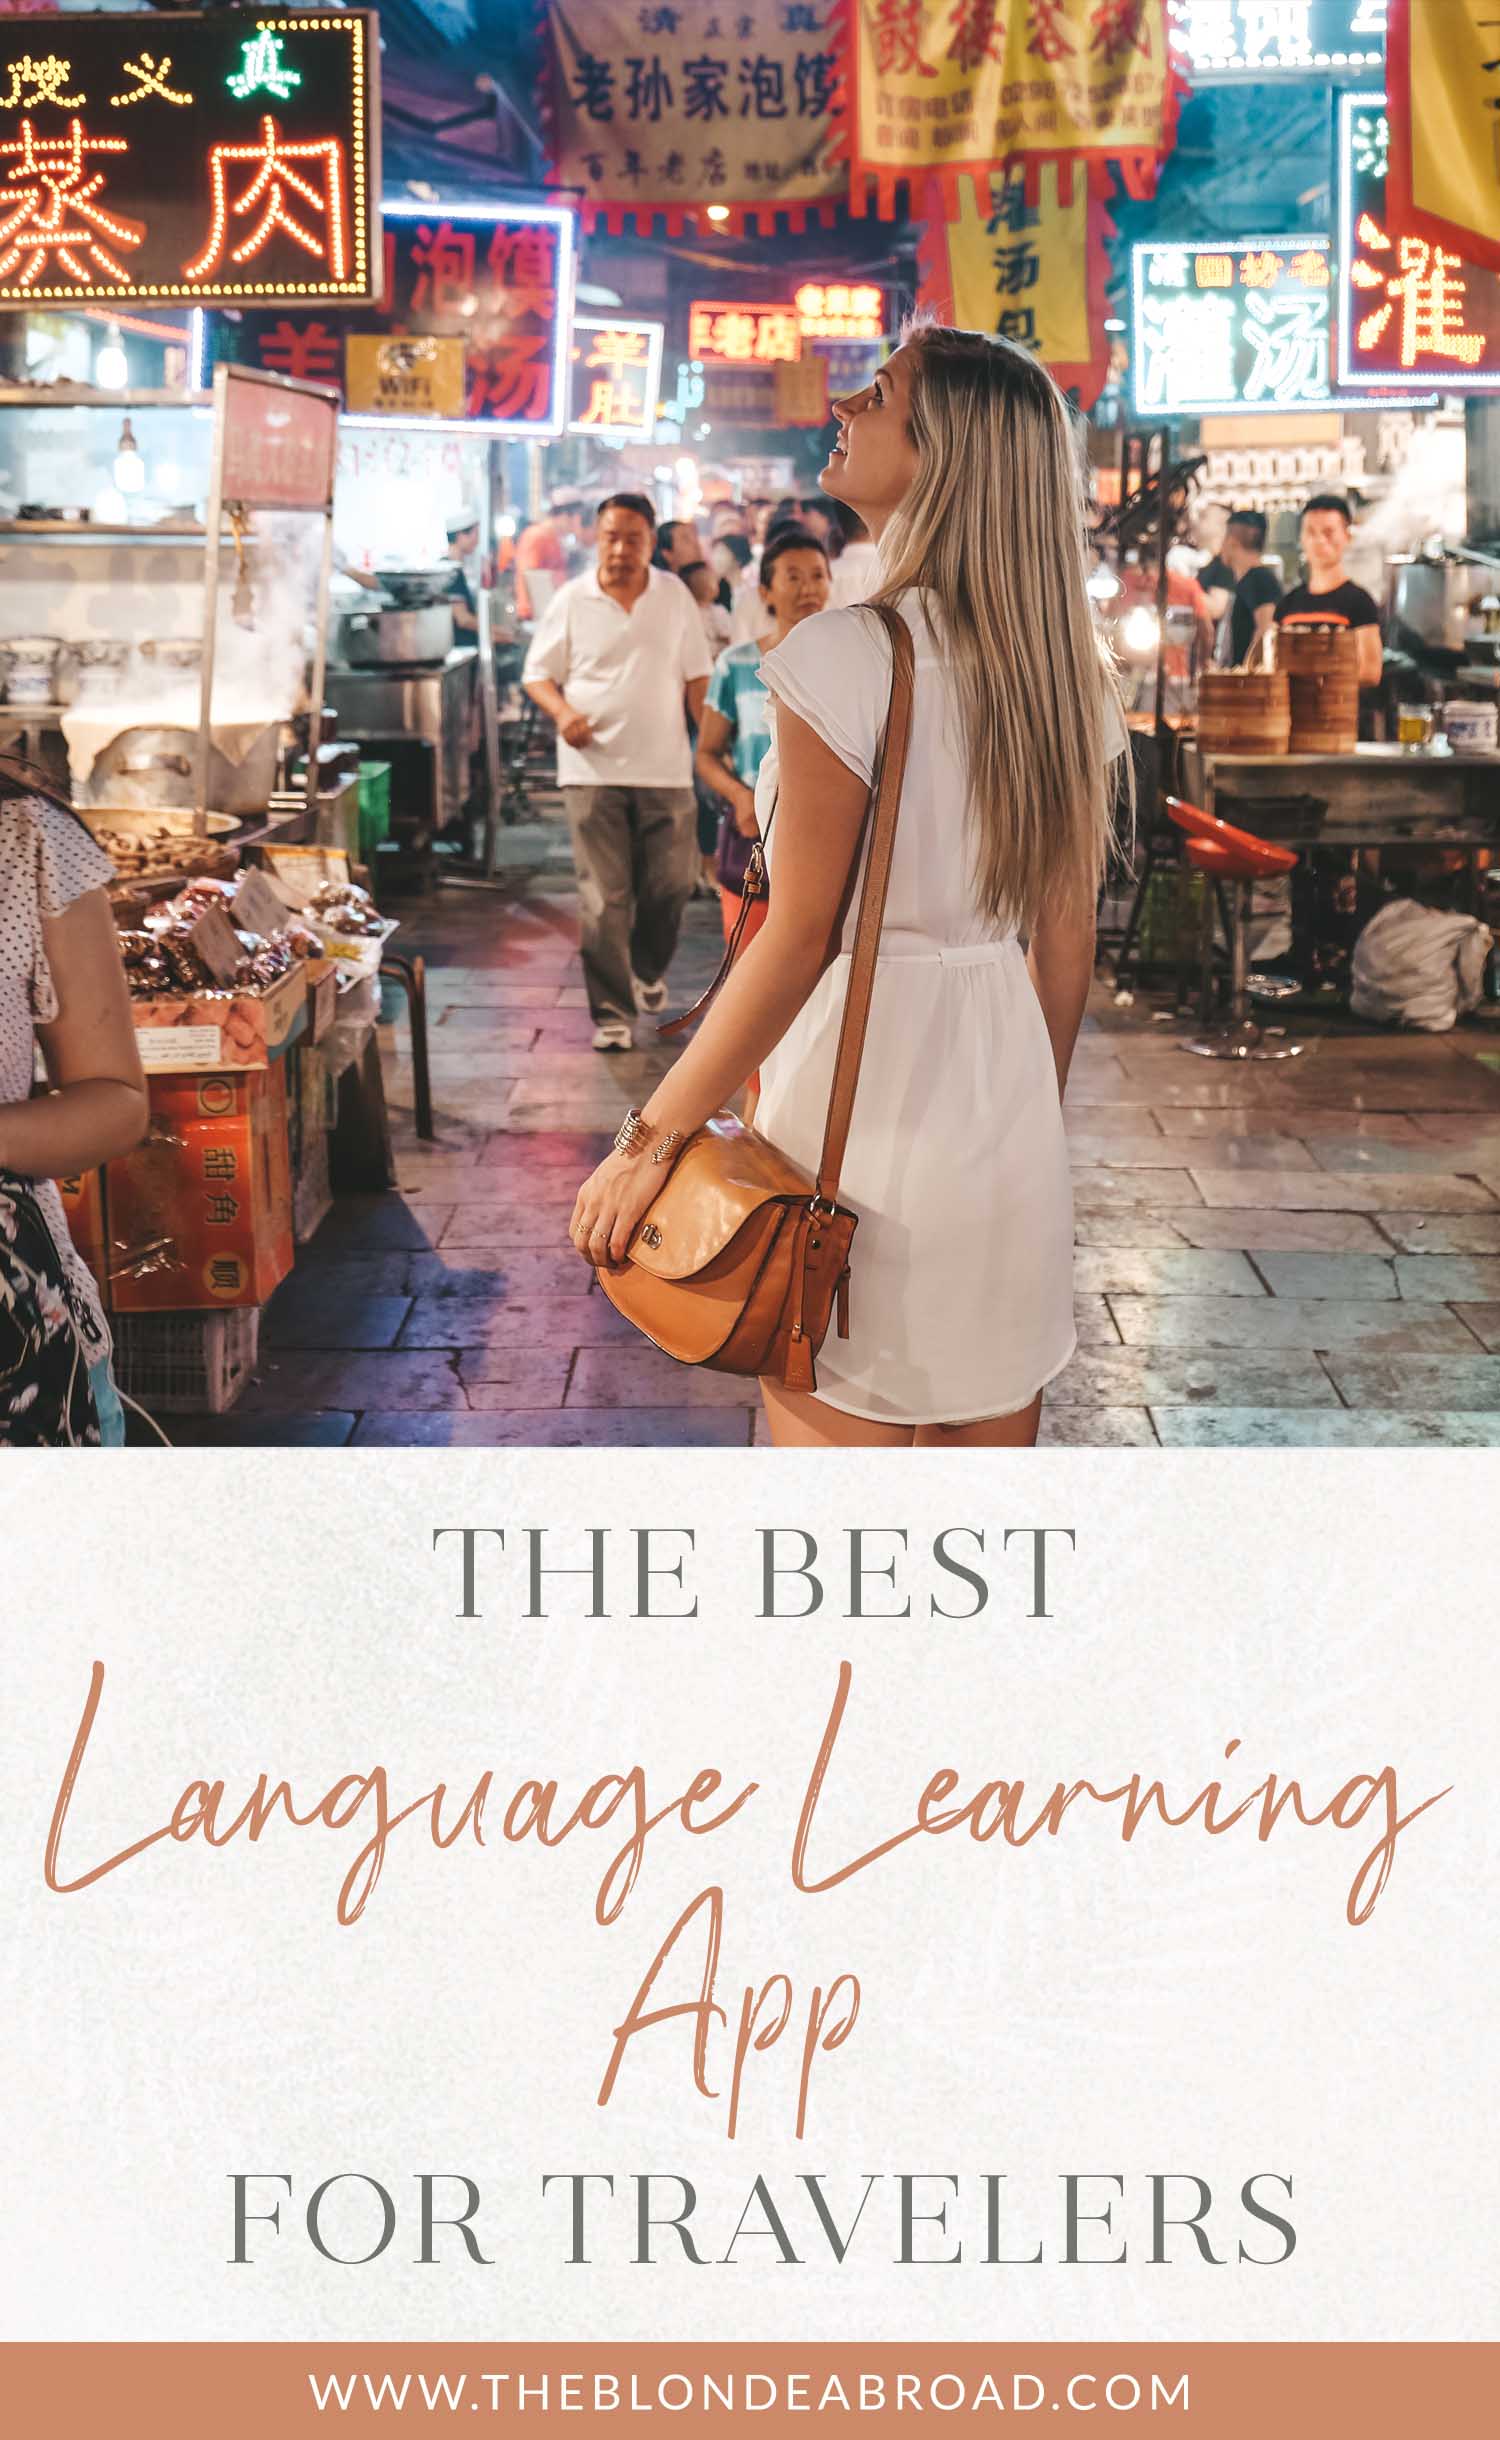 Best Language Learning App for Travelers